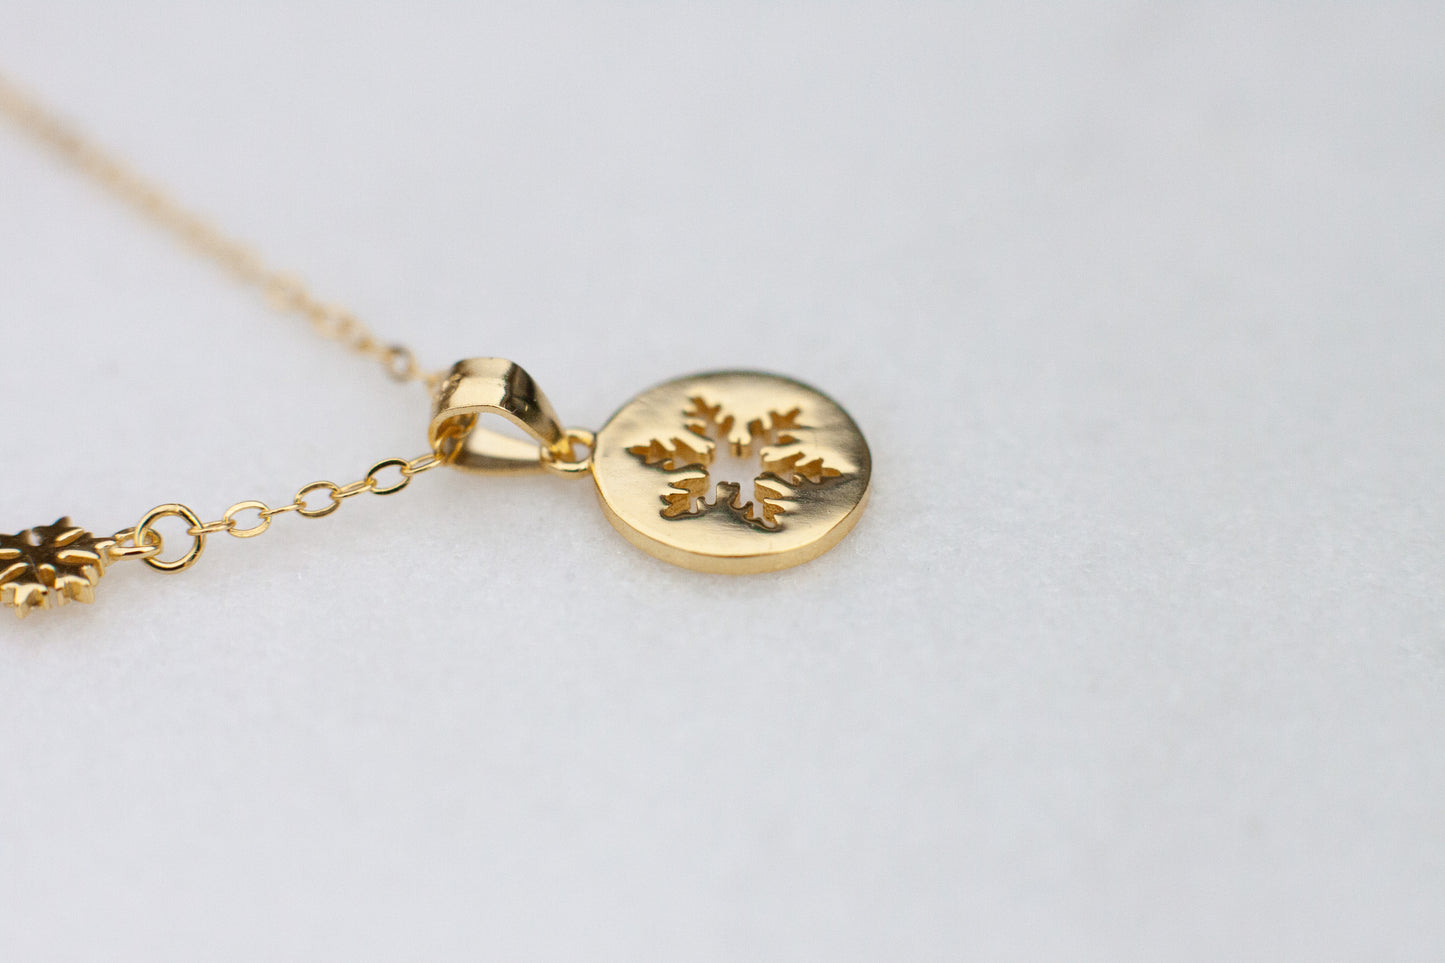 Gold Snowflake Necklace